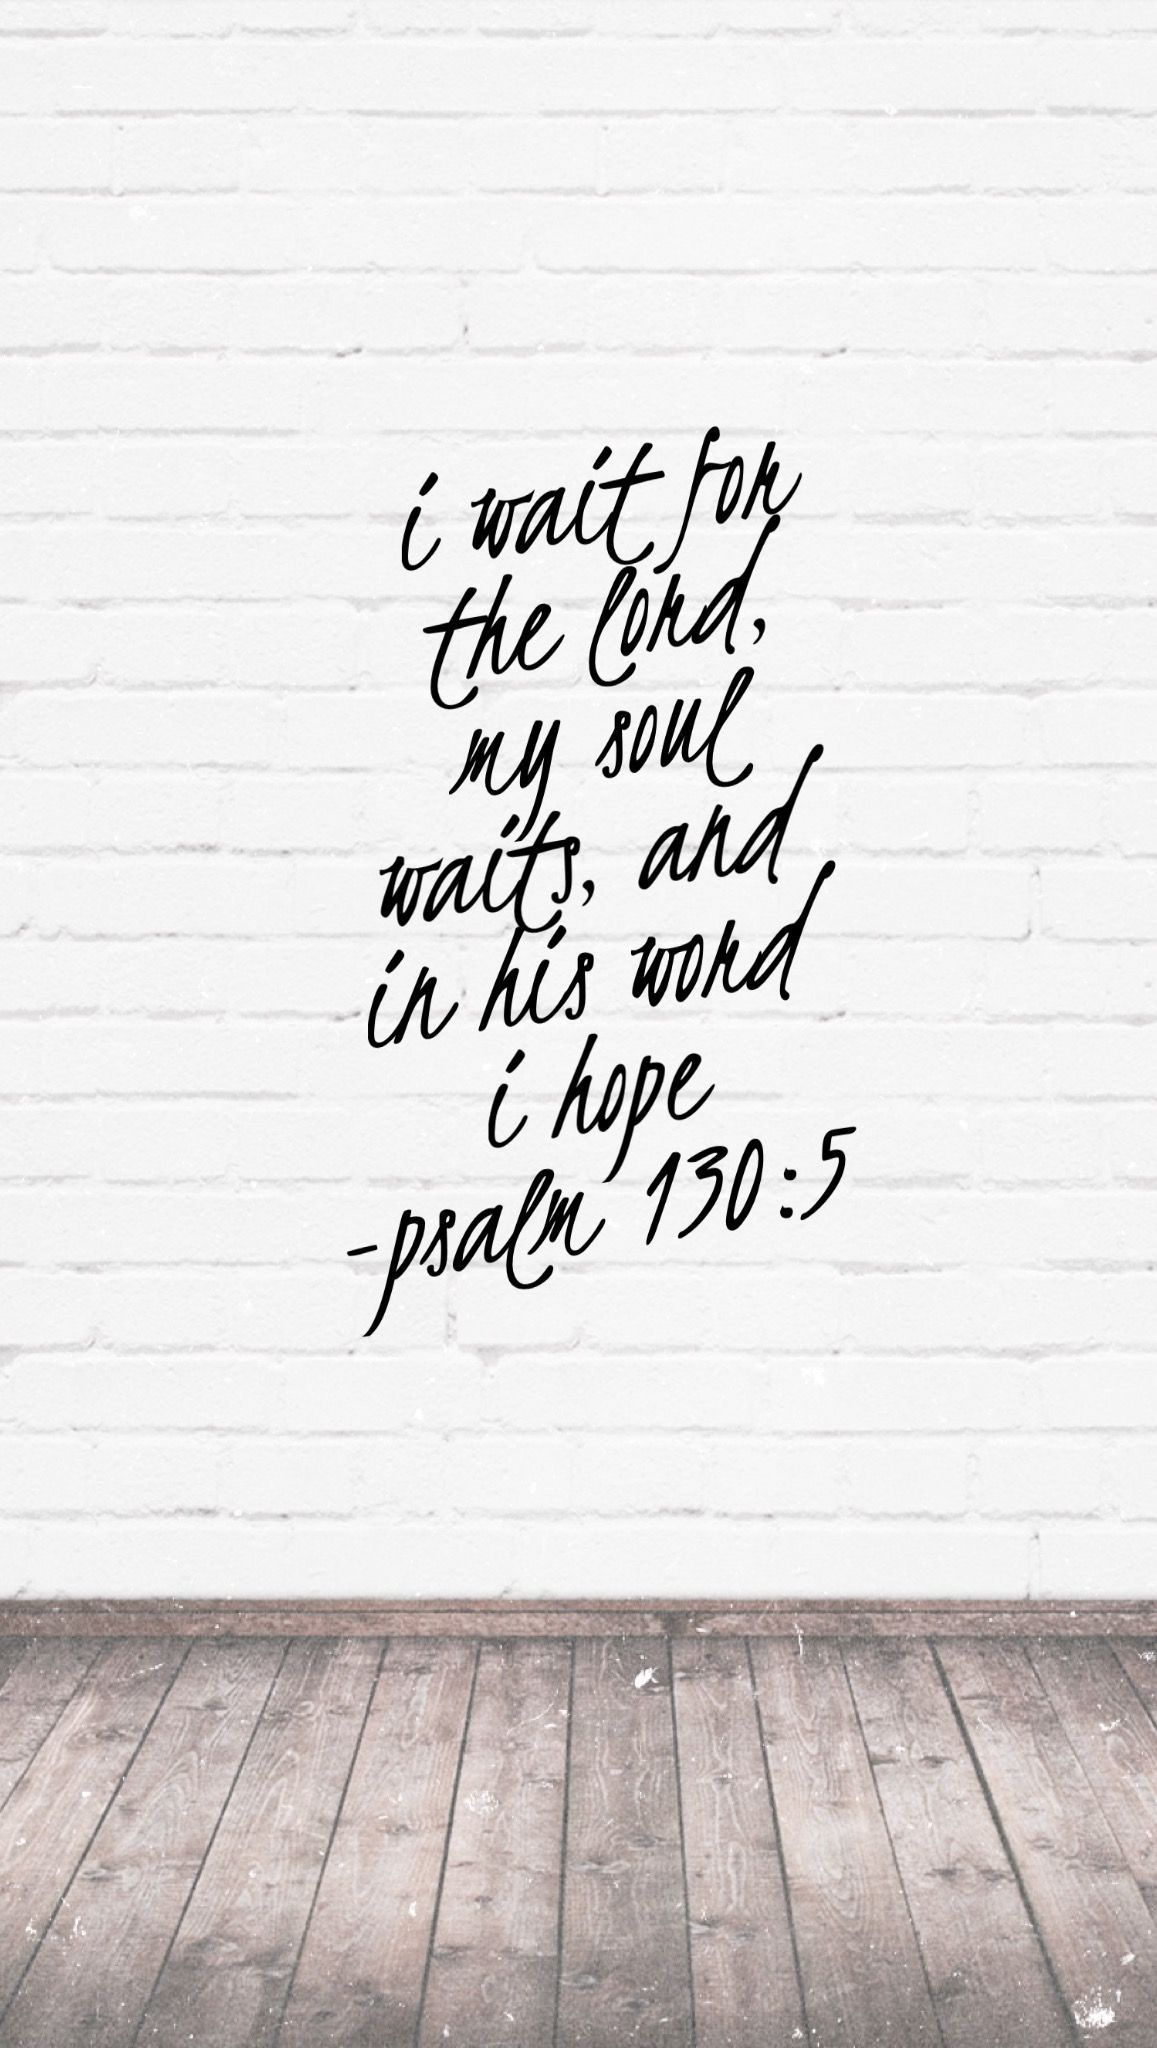 Psalm 130:5 #hope #waitfortheLord #iphone #wallpaper #Bible #truth